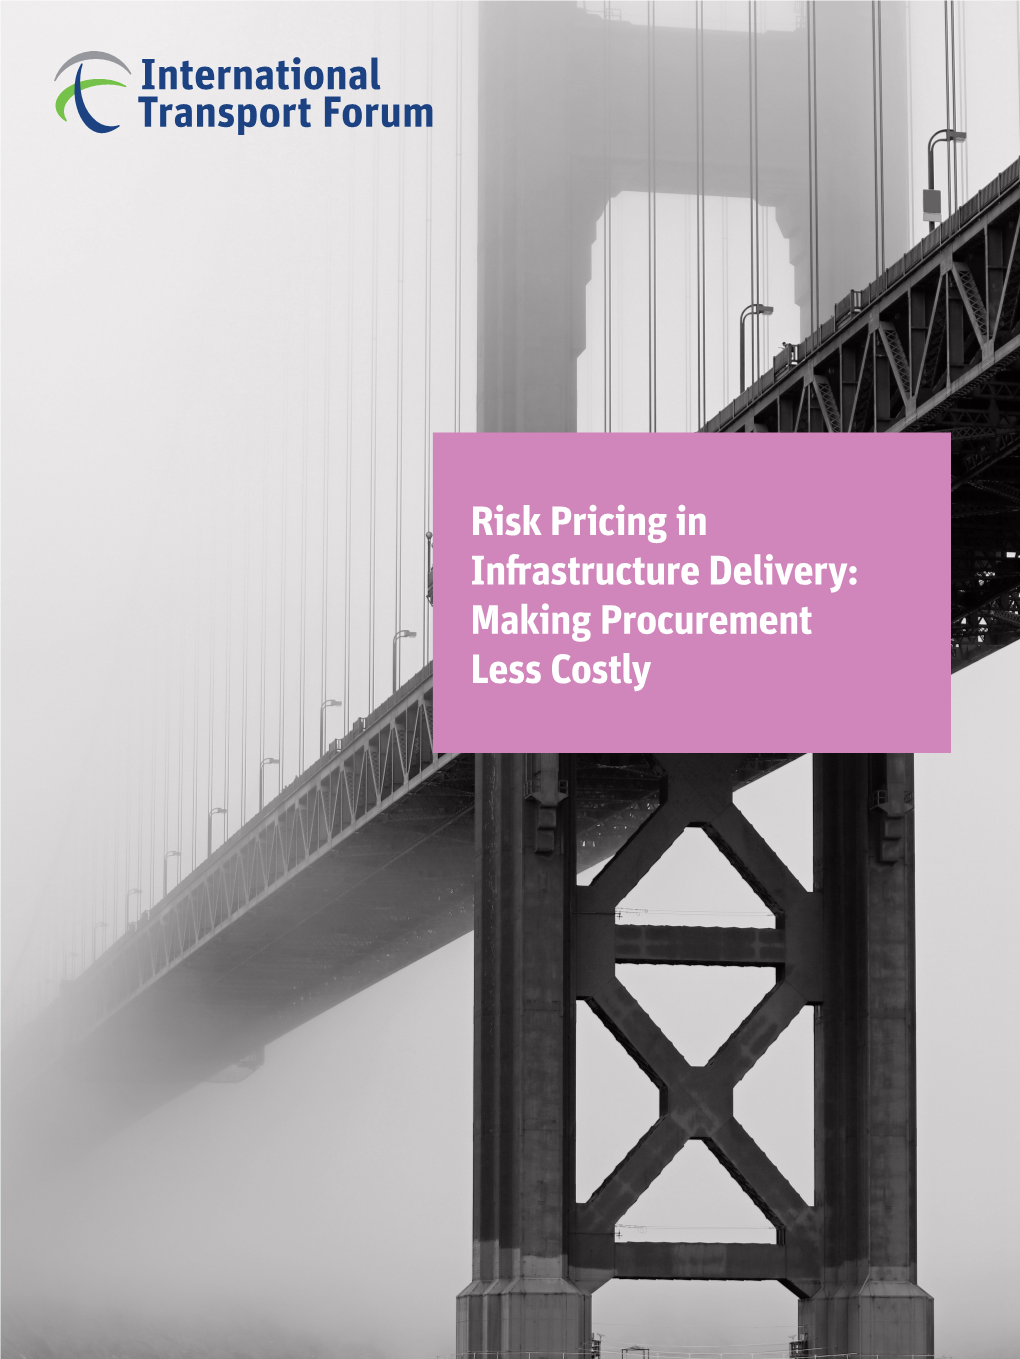 Risk Pricing in Infrastructure Delivery: Making Procurement Less Costly